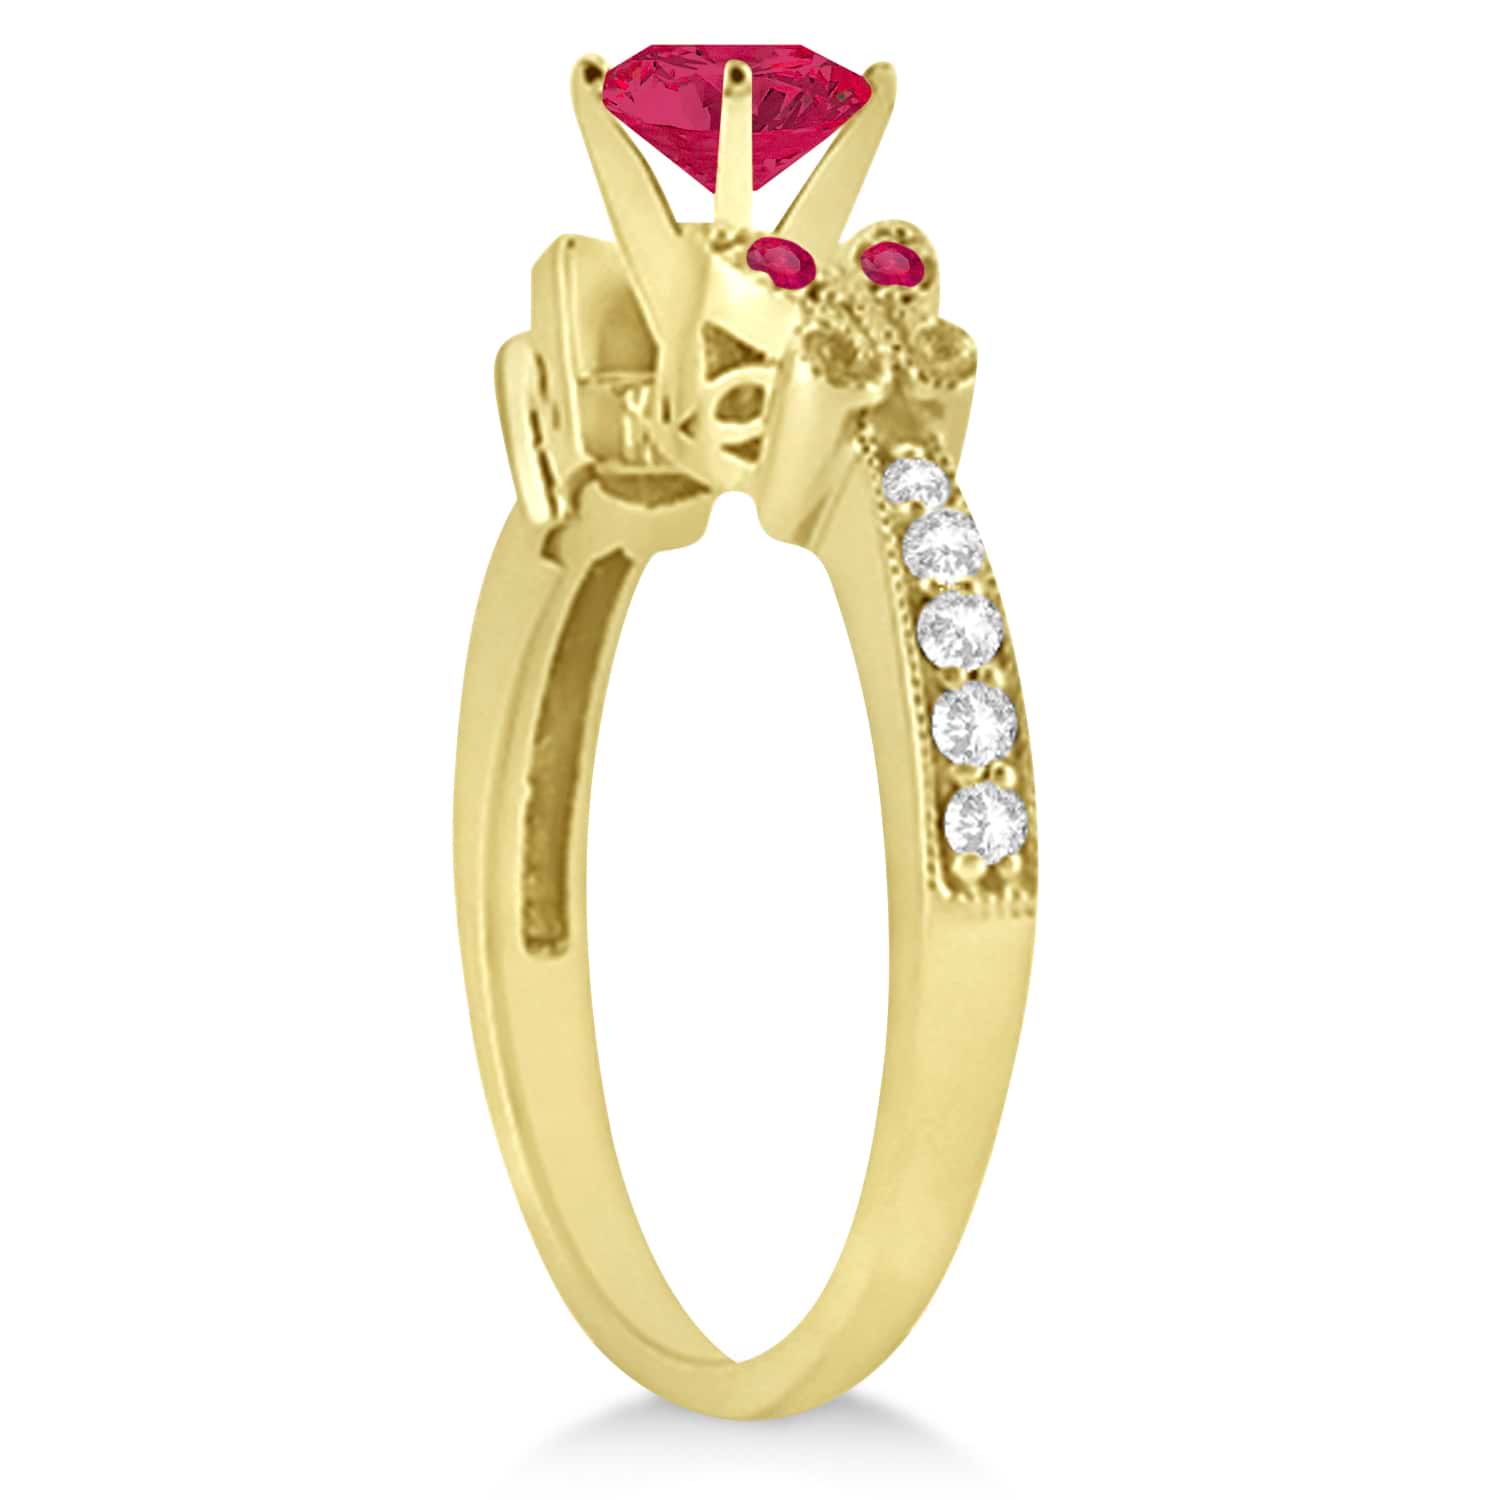 Butterfly Genuine Ruby & Diamond Engagement Ring 14K Yellow Gold 0.86ct